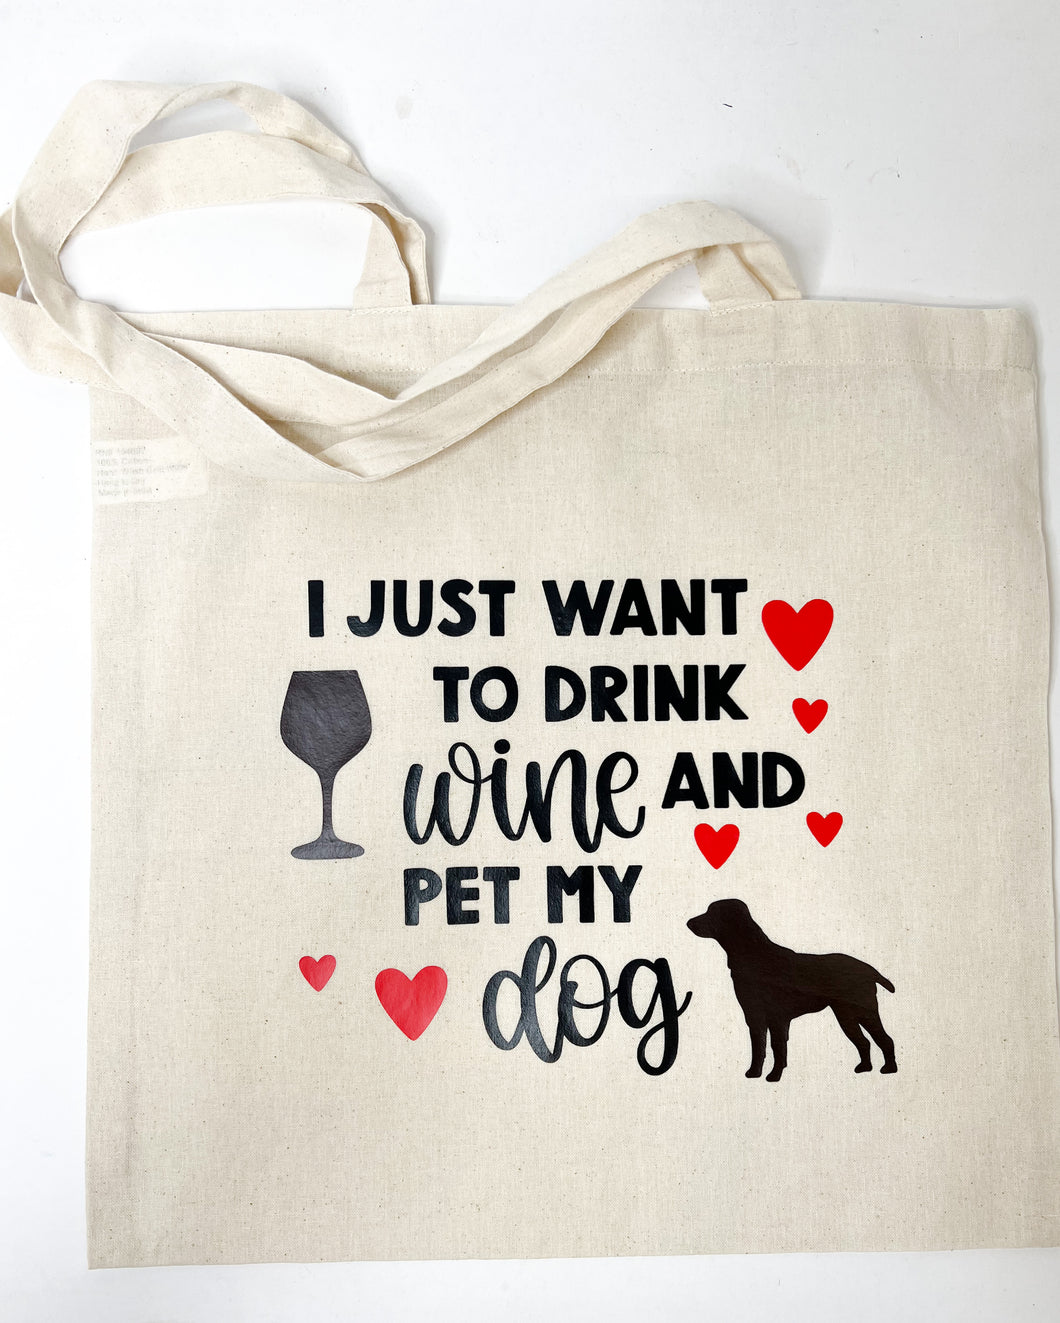 I Just Want to Drink and Pet My Dog - Canvas Tote Bag